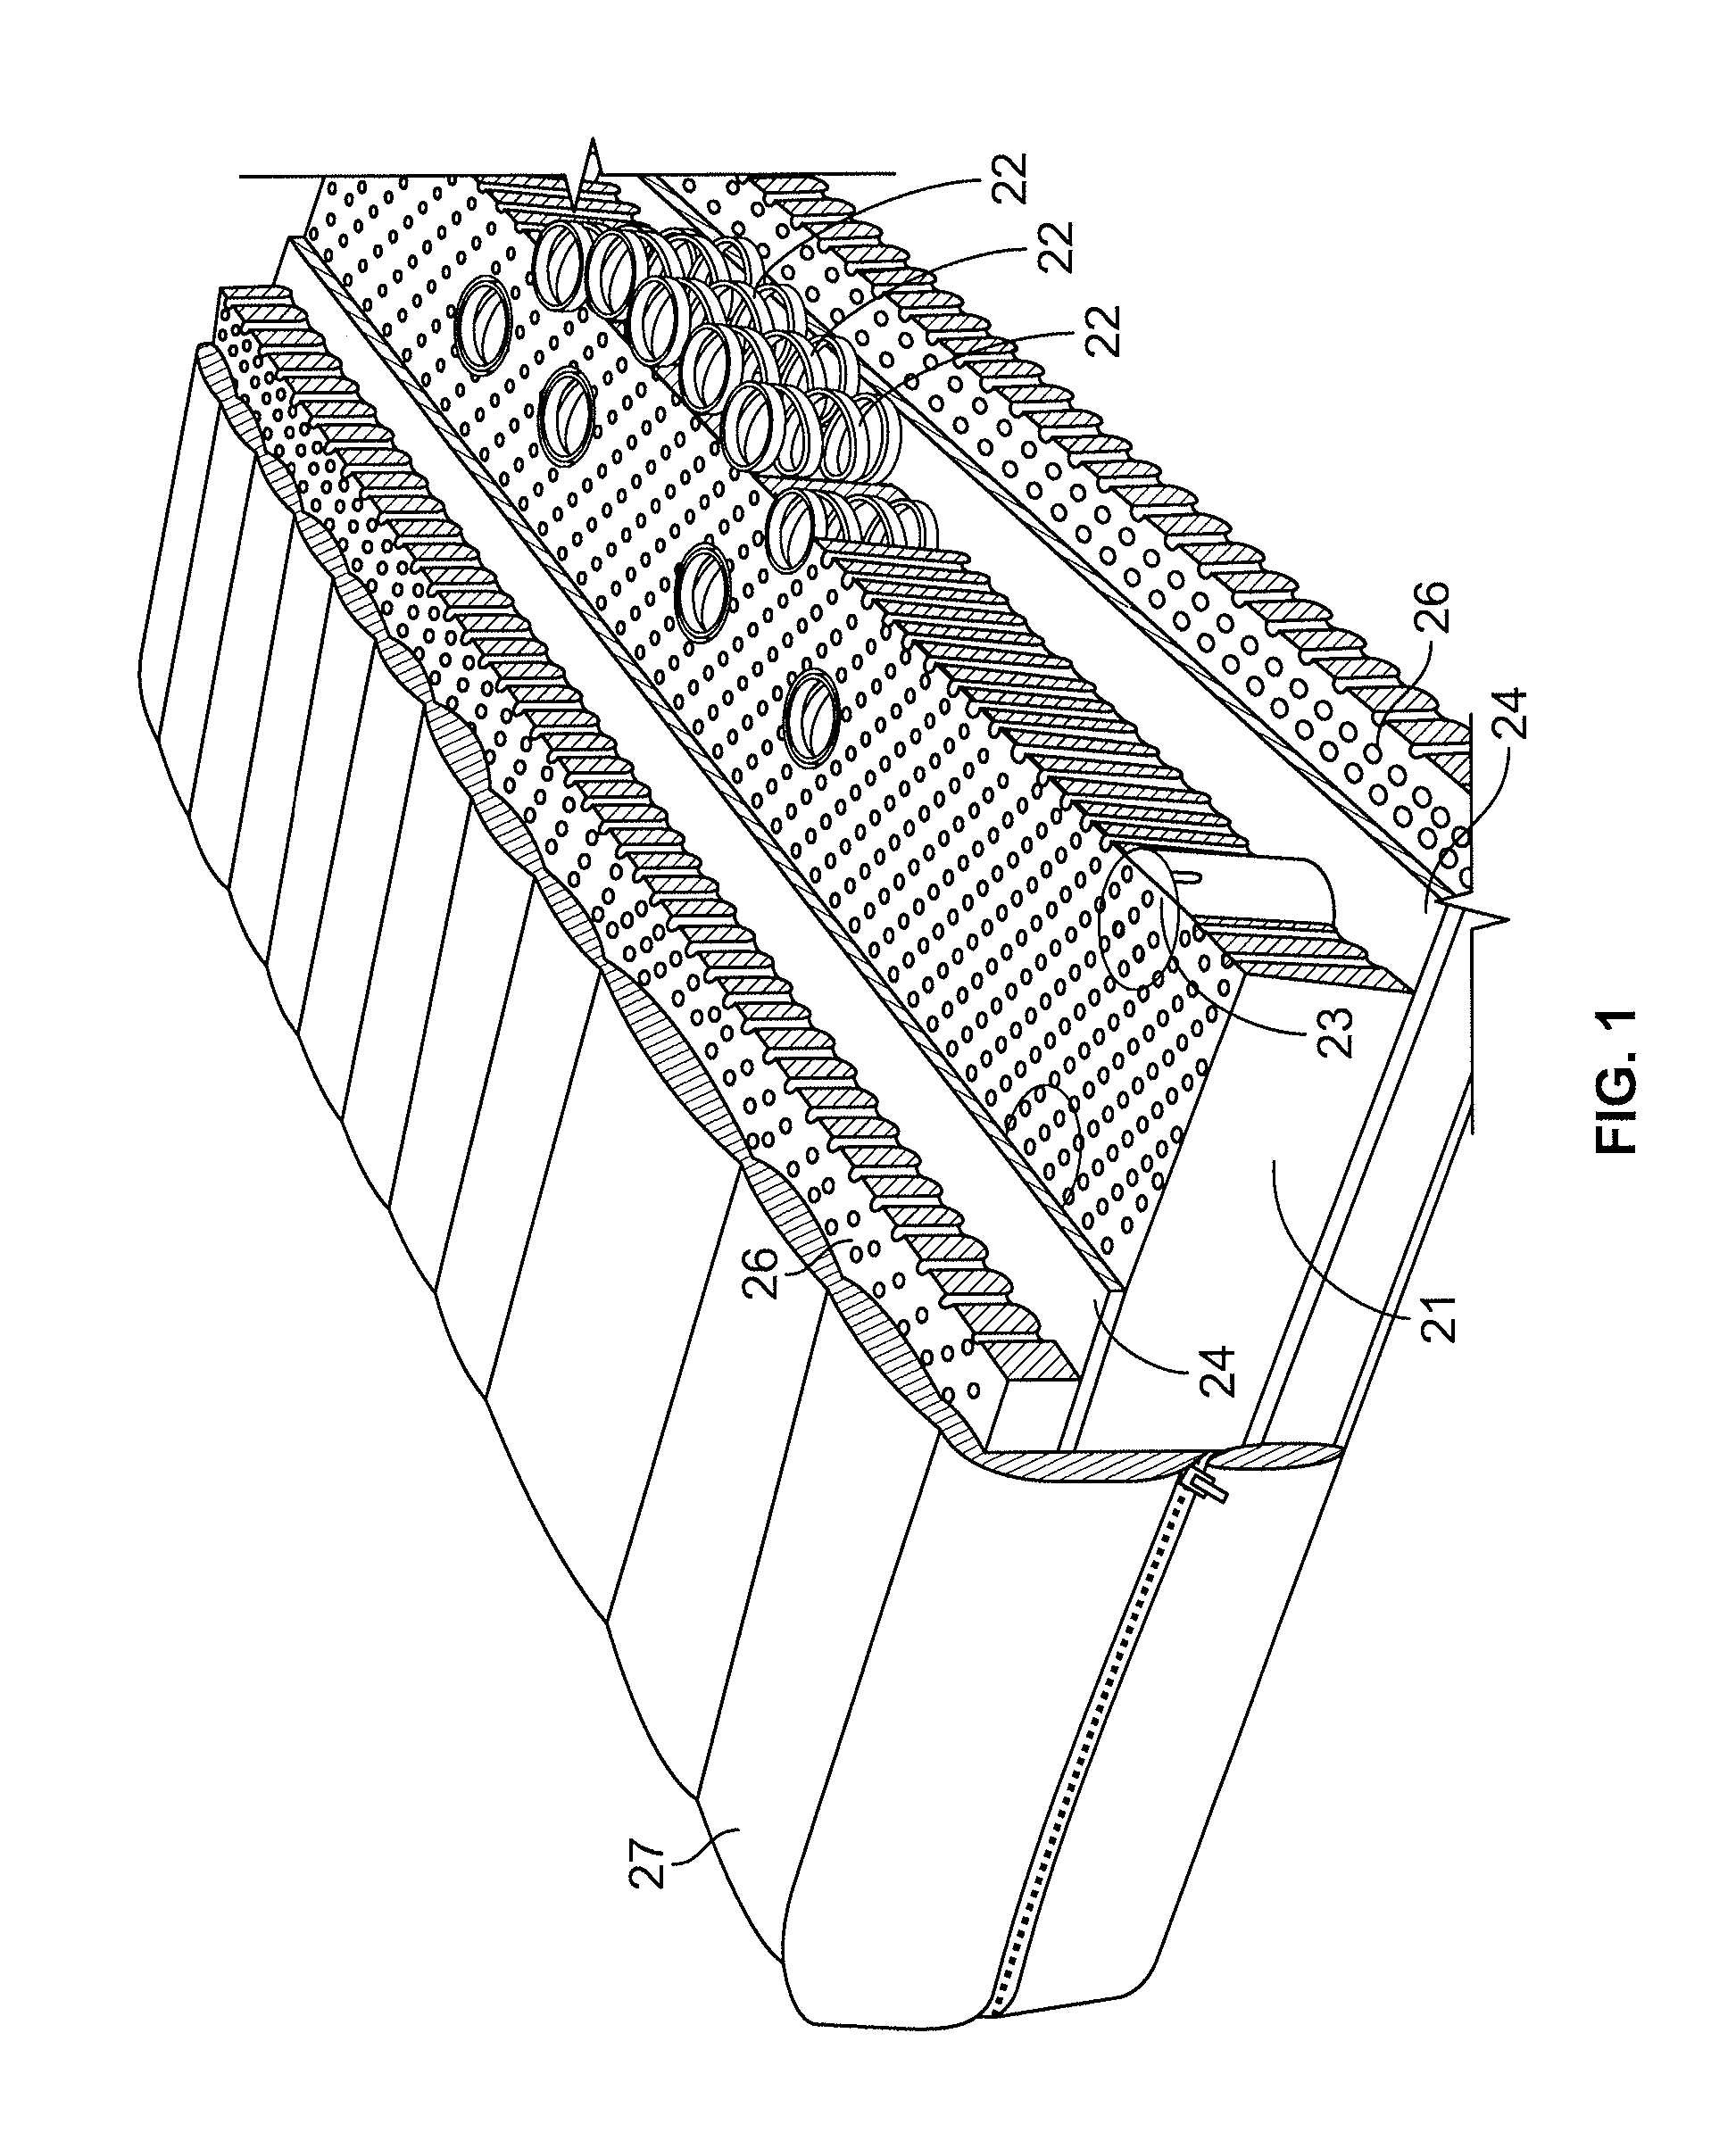 Wooden spring and mattress manufactured with wooden springs